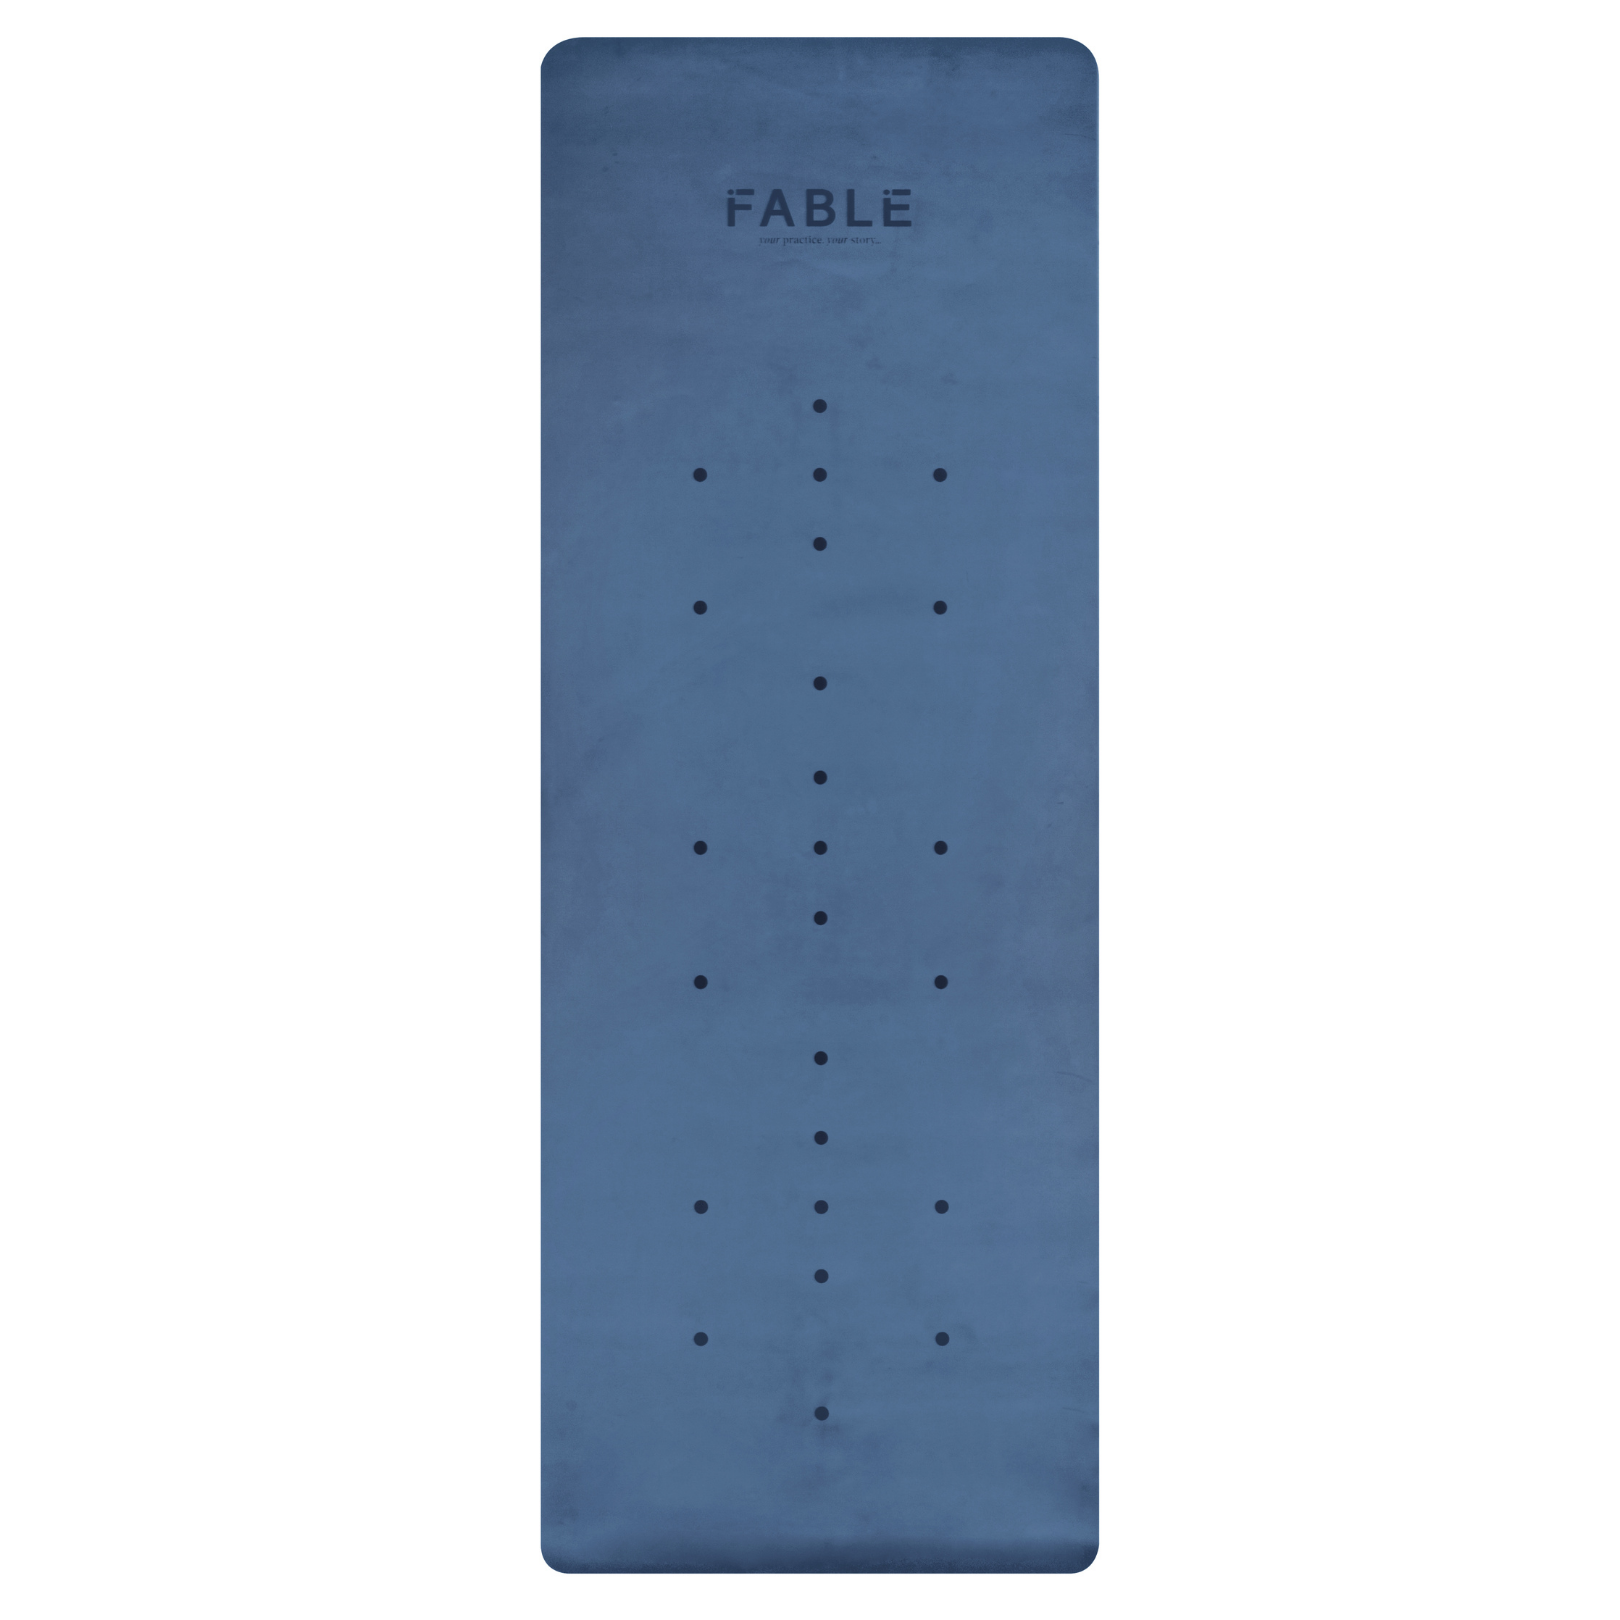 Ocean Blue Yoga Mat from Fable Yoga - 4mm Pro Grip